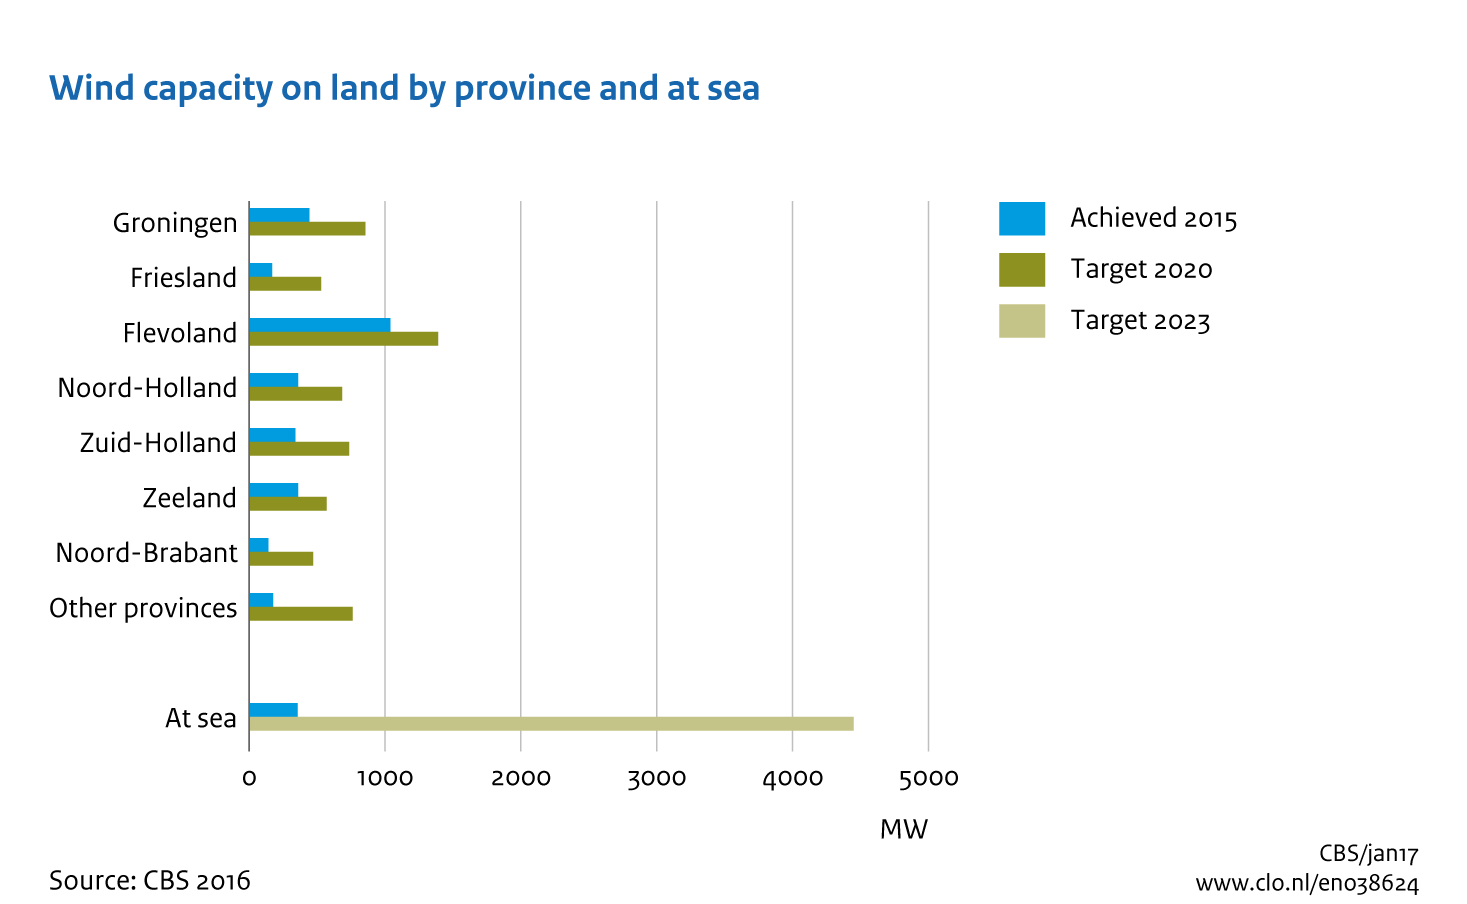 Image Wind capacity on land by province and at sea. The image is further explained in the text.